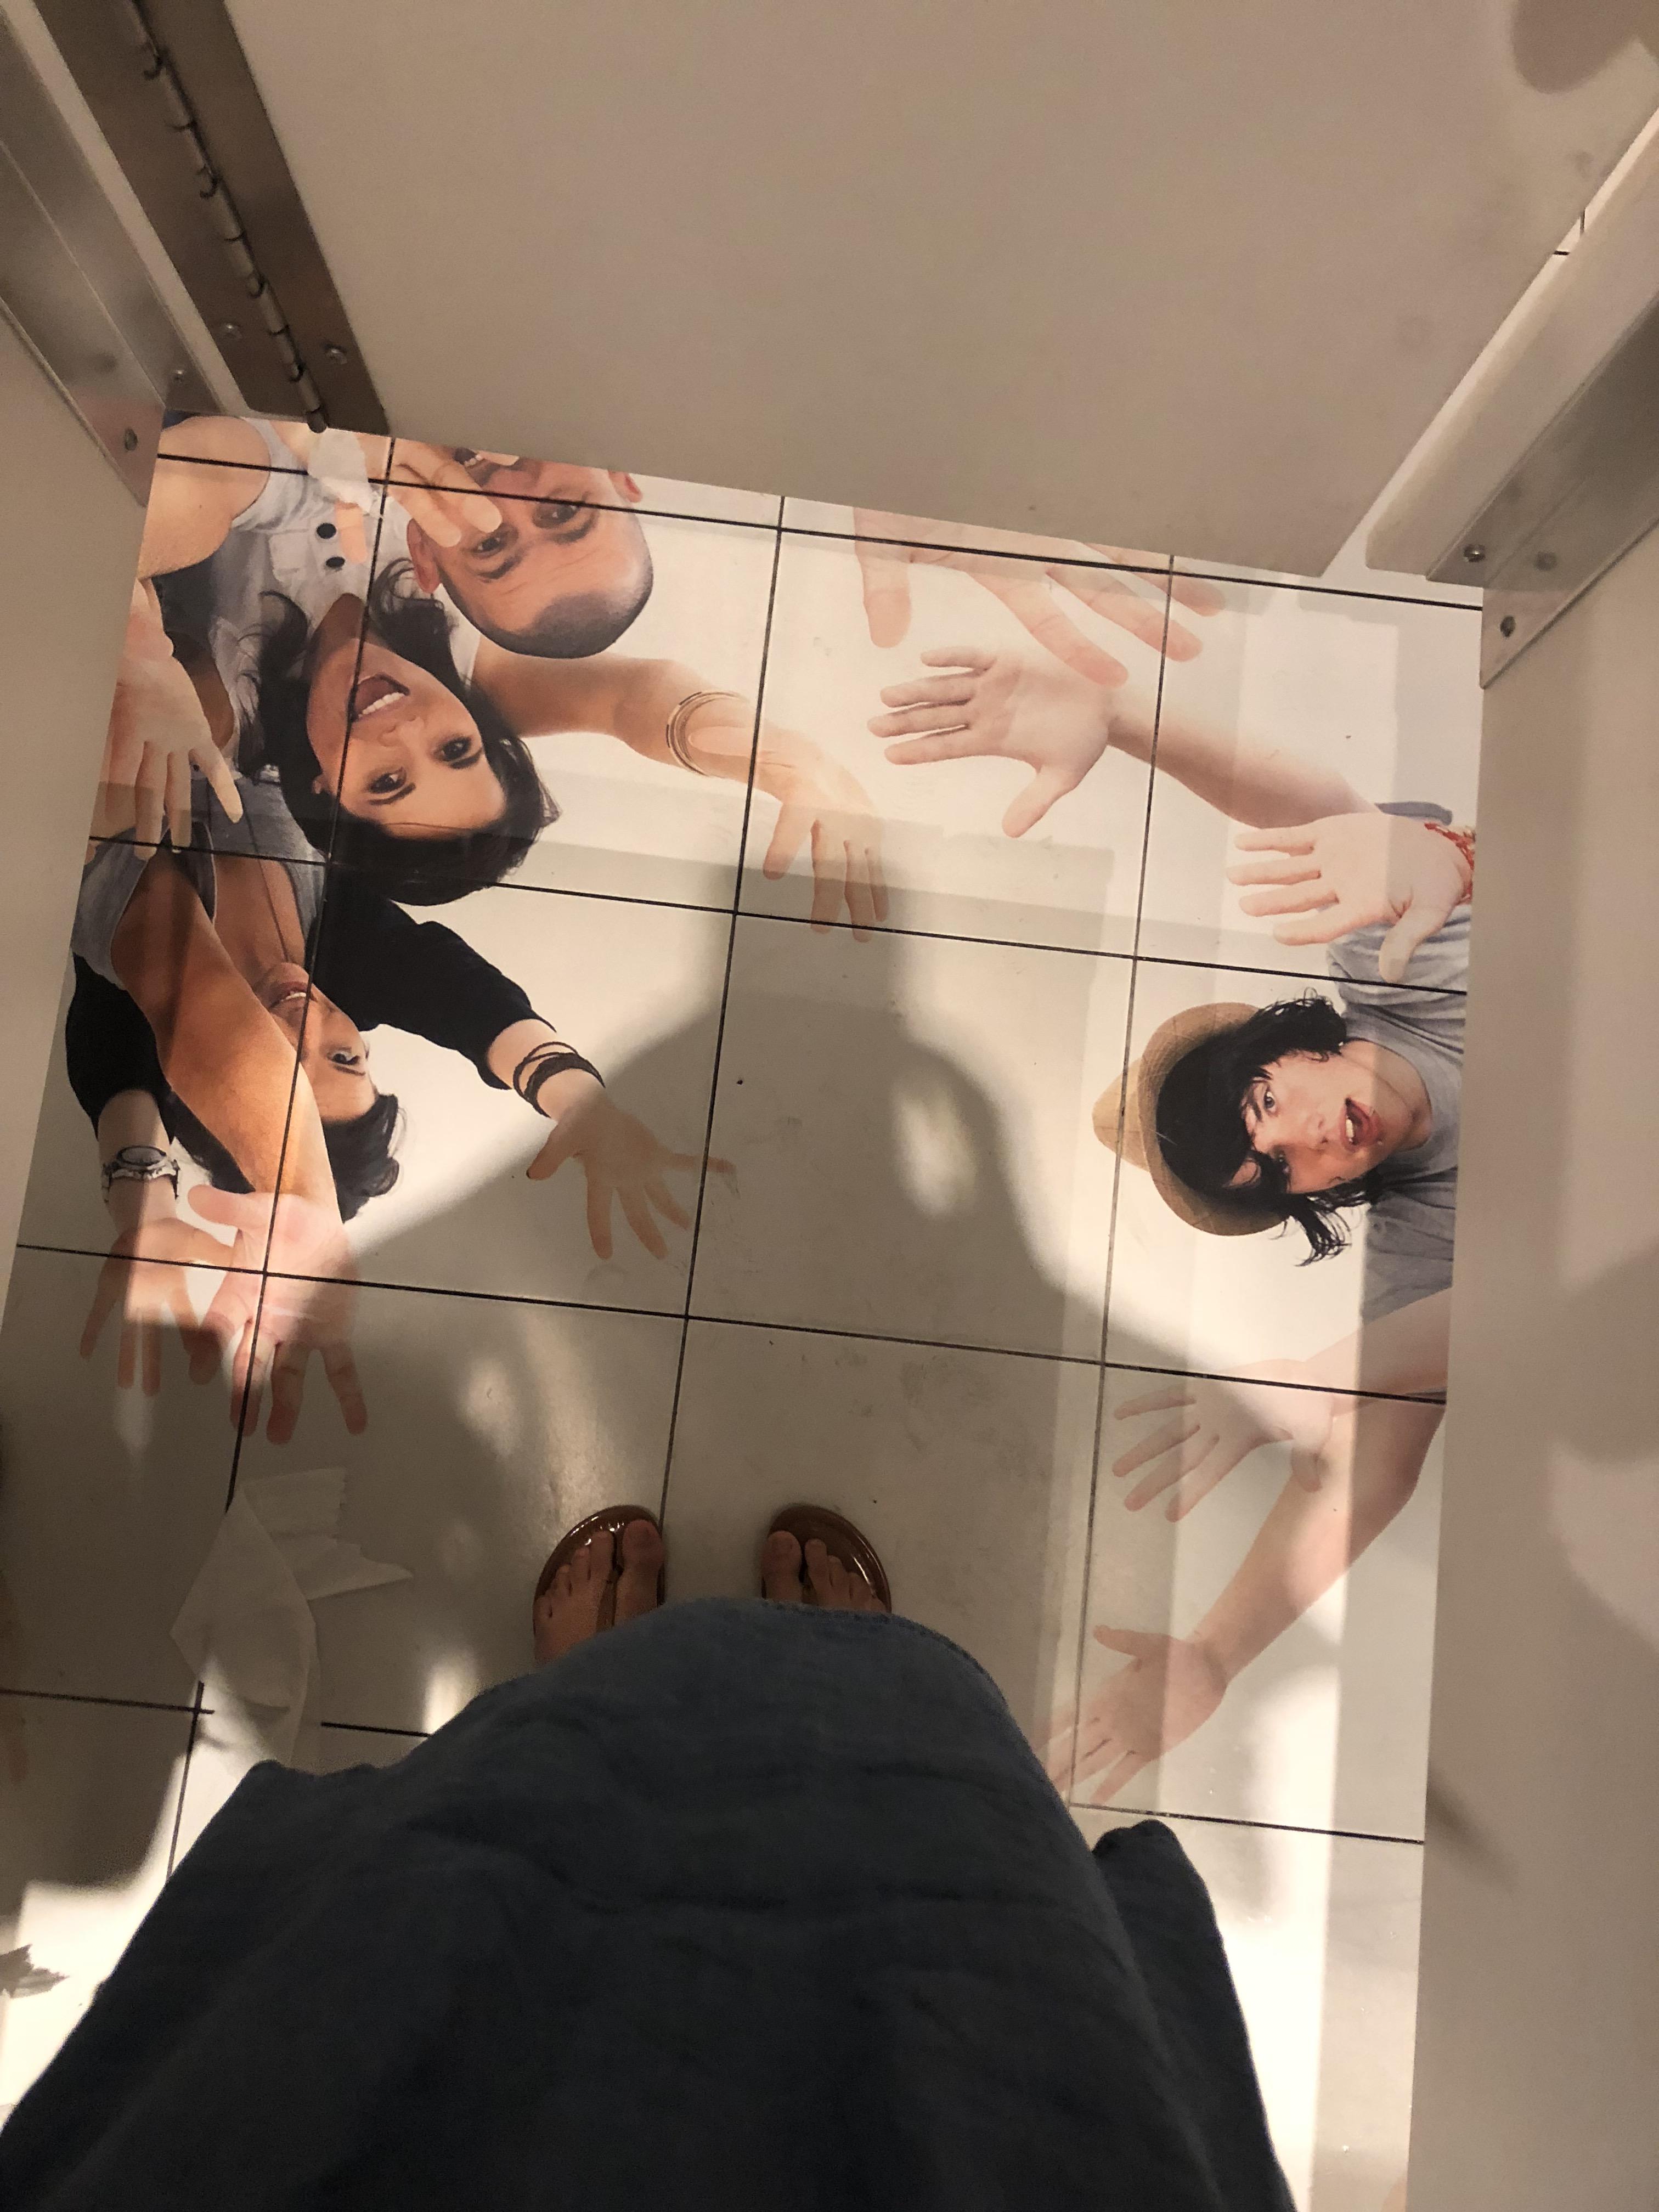 bathroom designs from hell